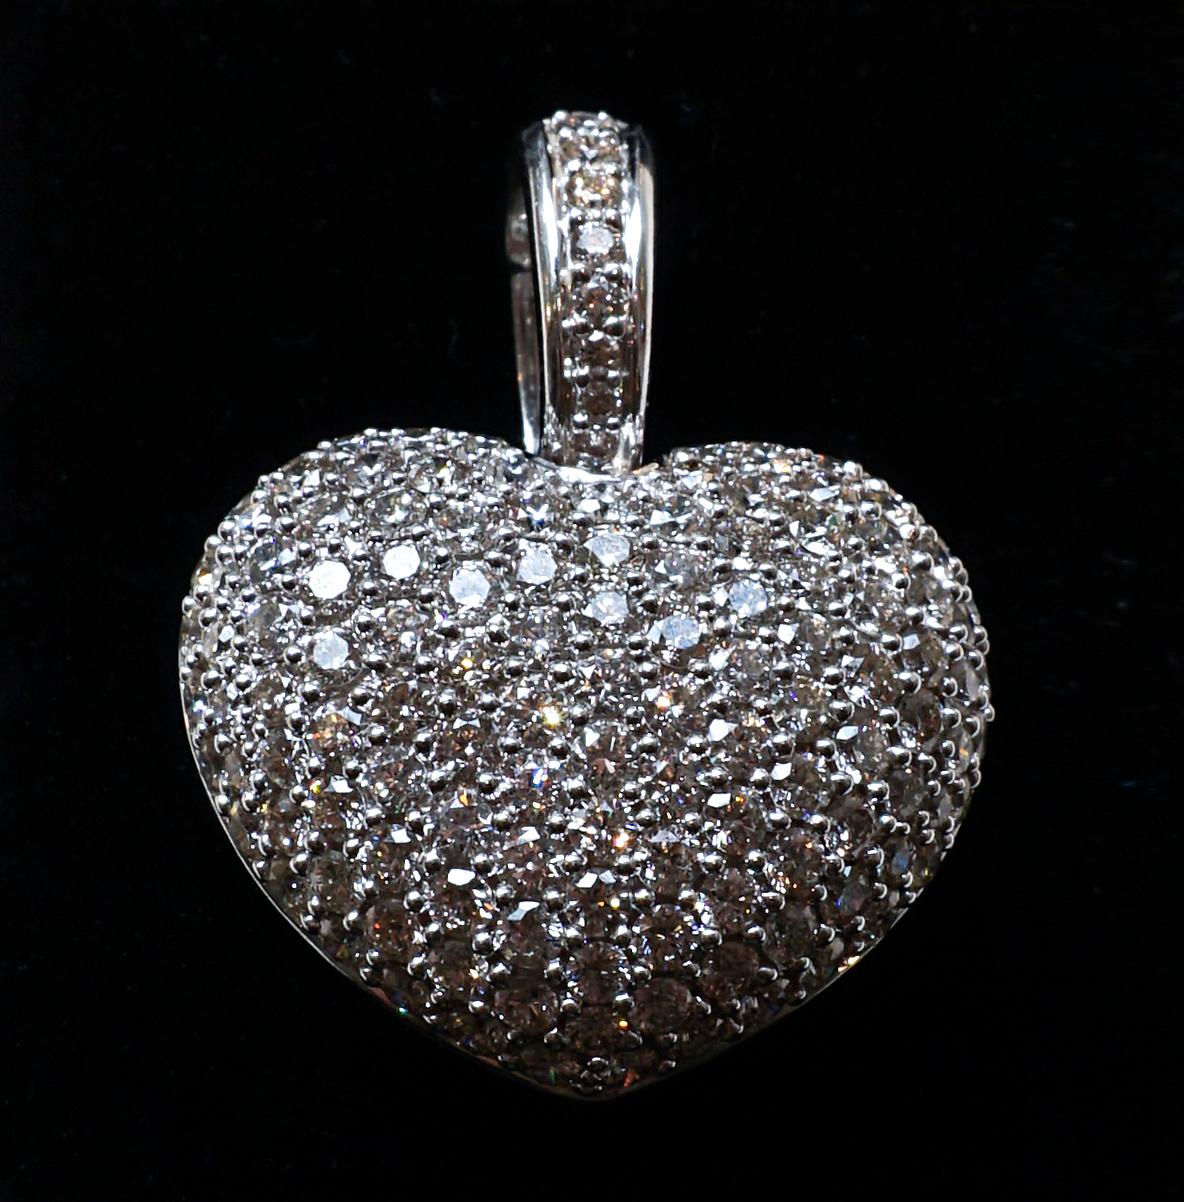 Women's Heart-Shaped Pendant Clip With Numerous Diamonds 4.85 ct White Gold 18k For Sale